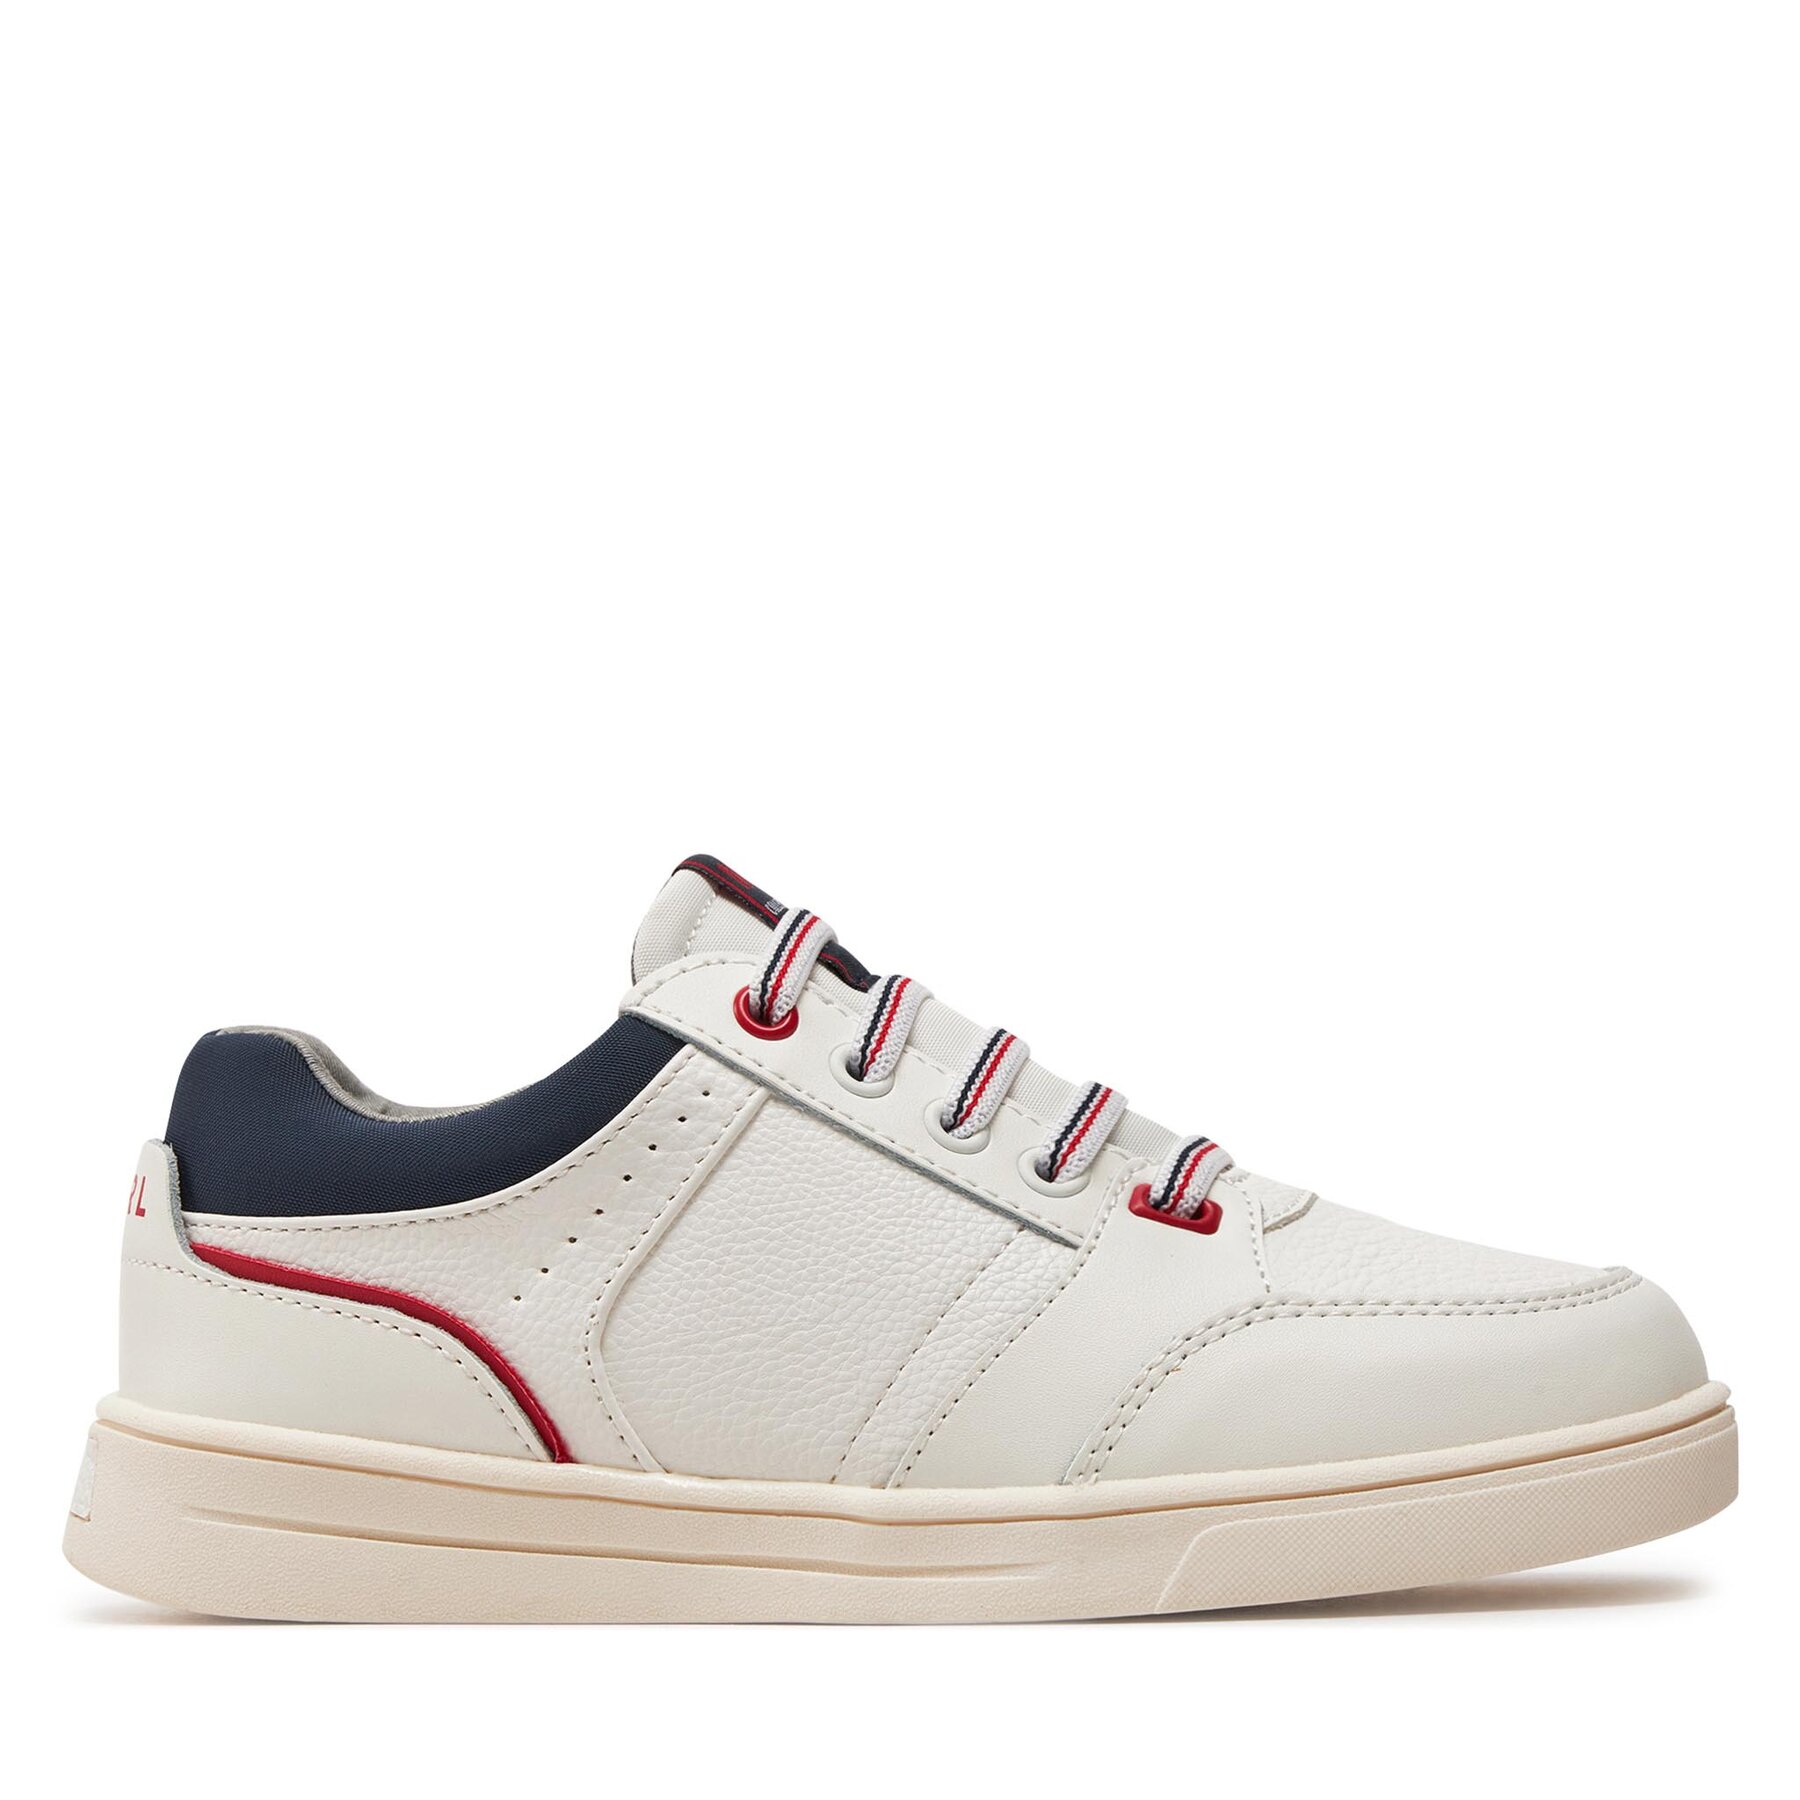 Sneakers Mayoral 45569 White Red 18 von Mayoral